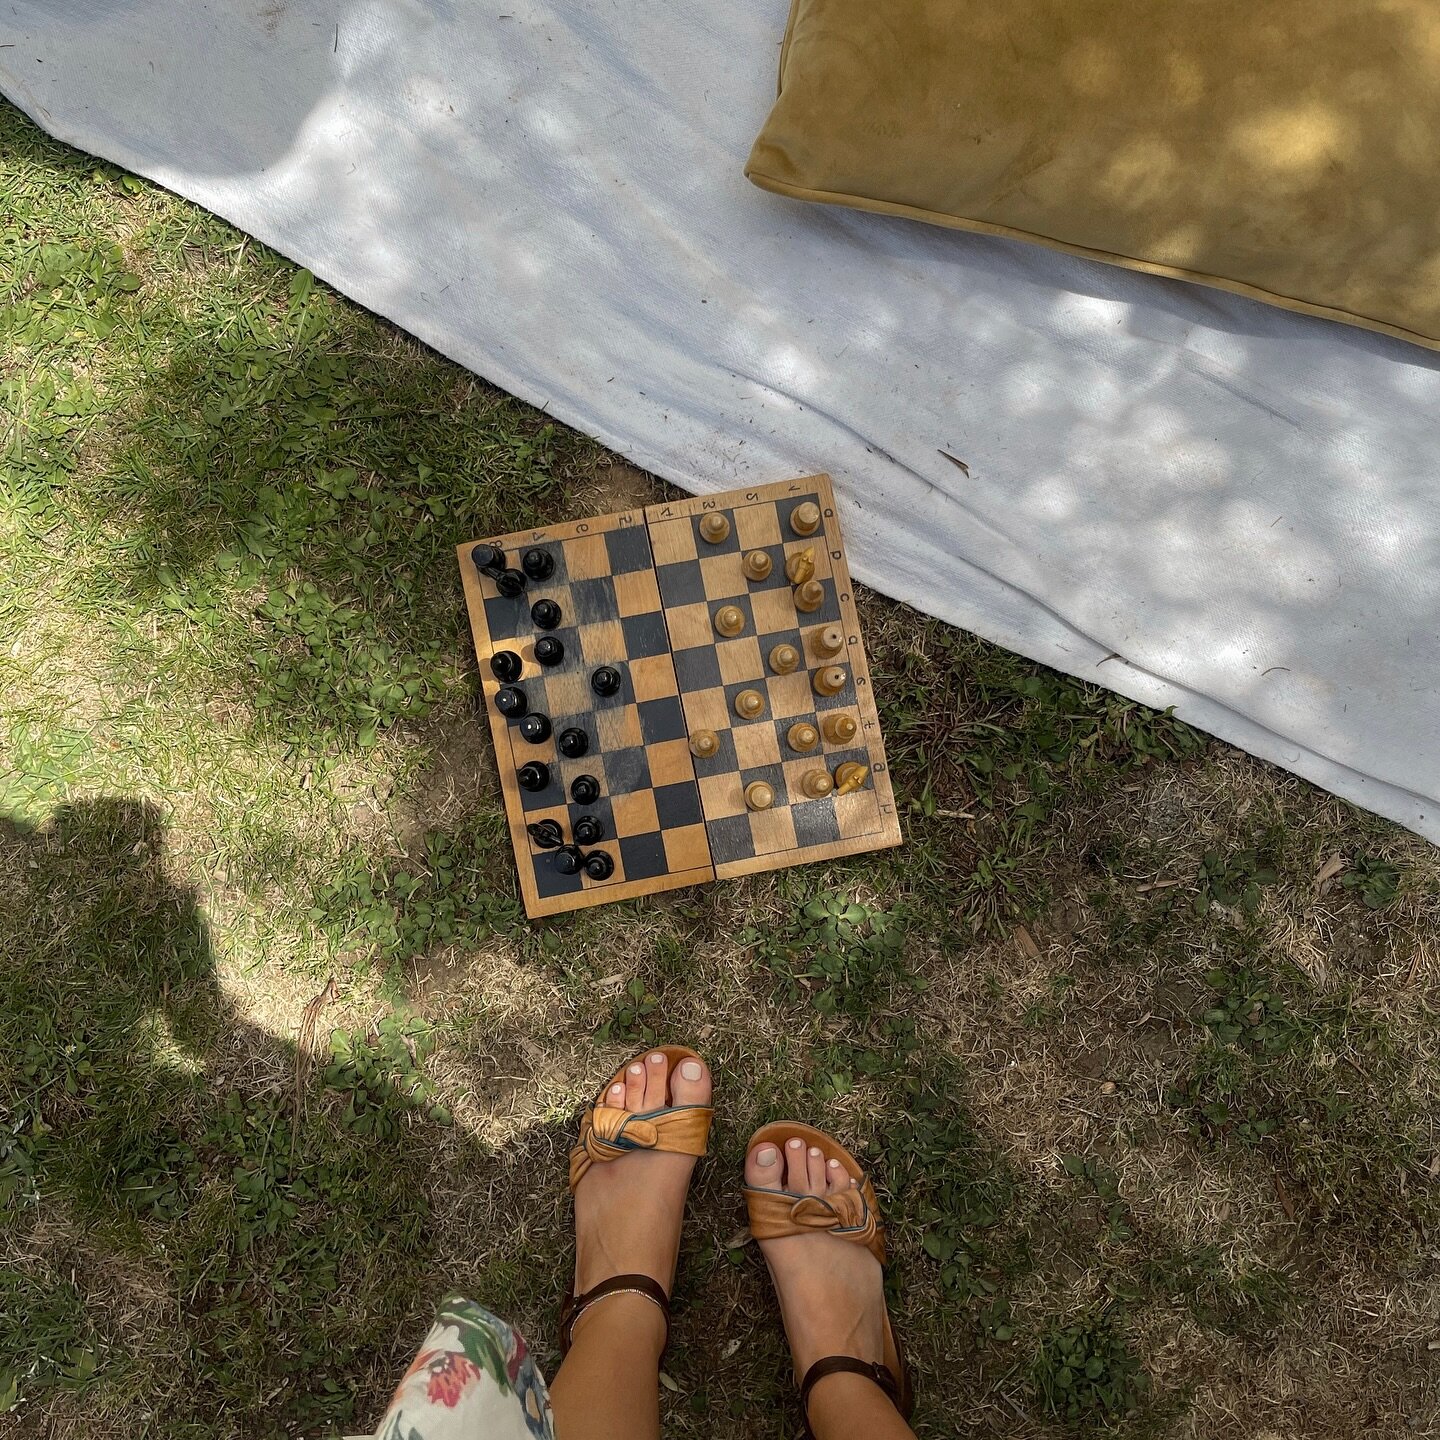 Checkmate ♟️

Picnic games are my new fav